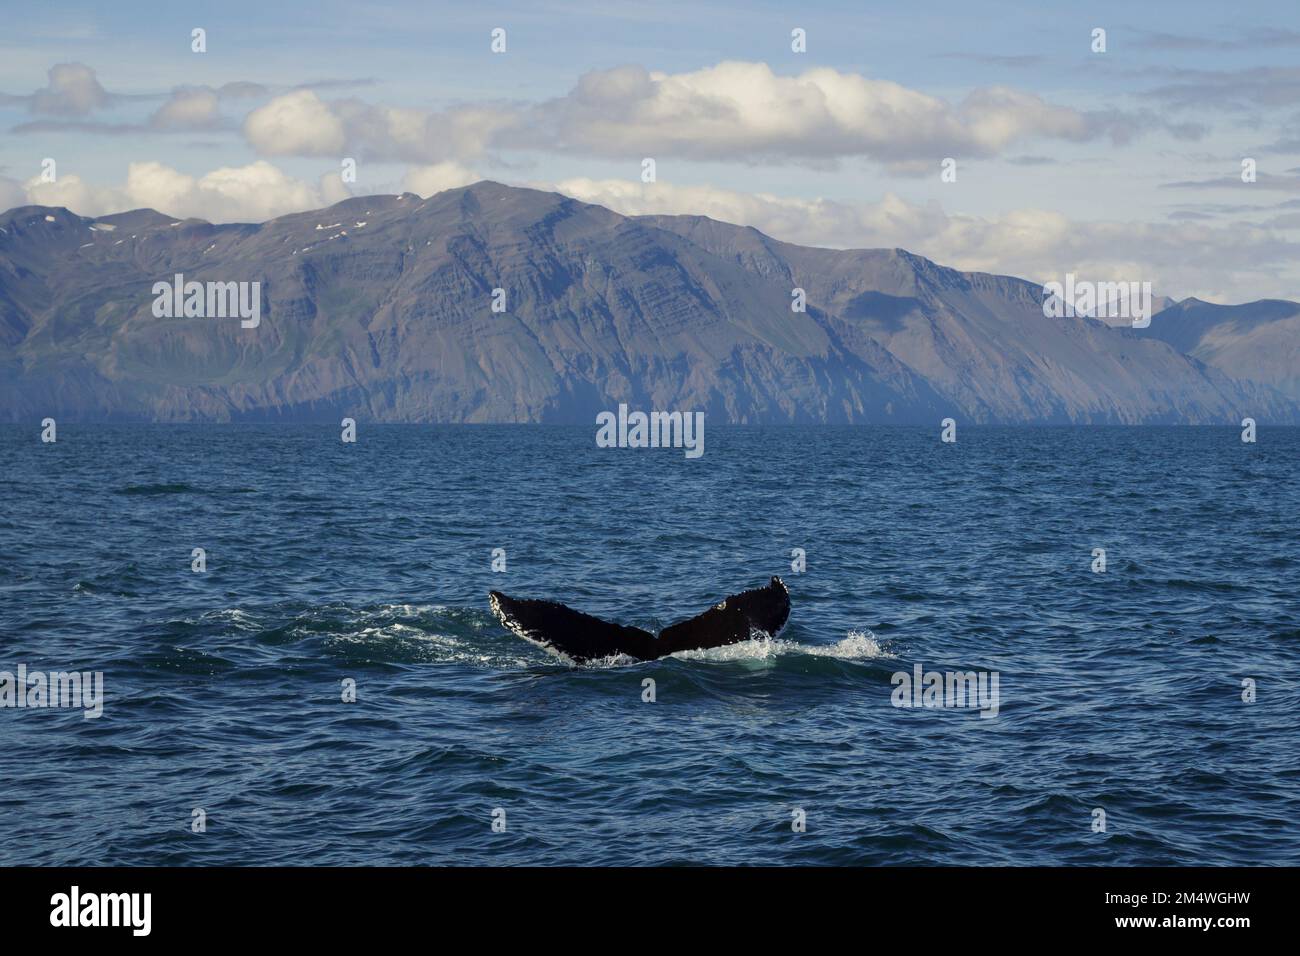 Killer whale tail in ocean water landscape photo Stock Photo